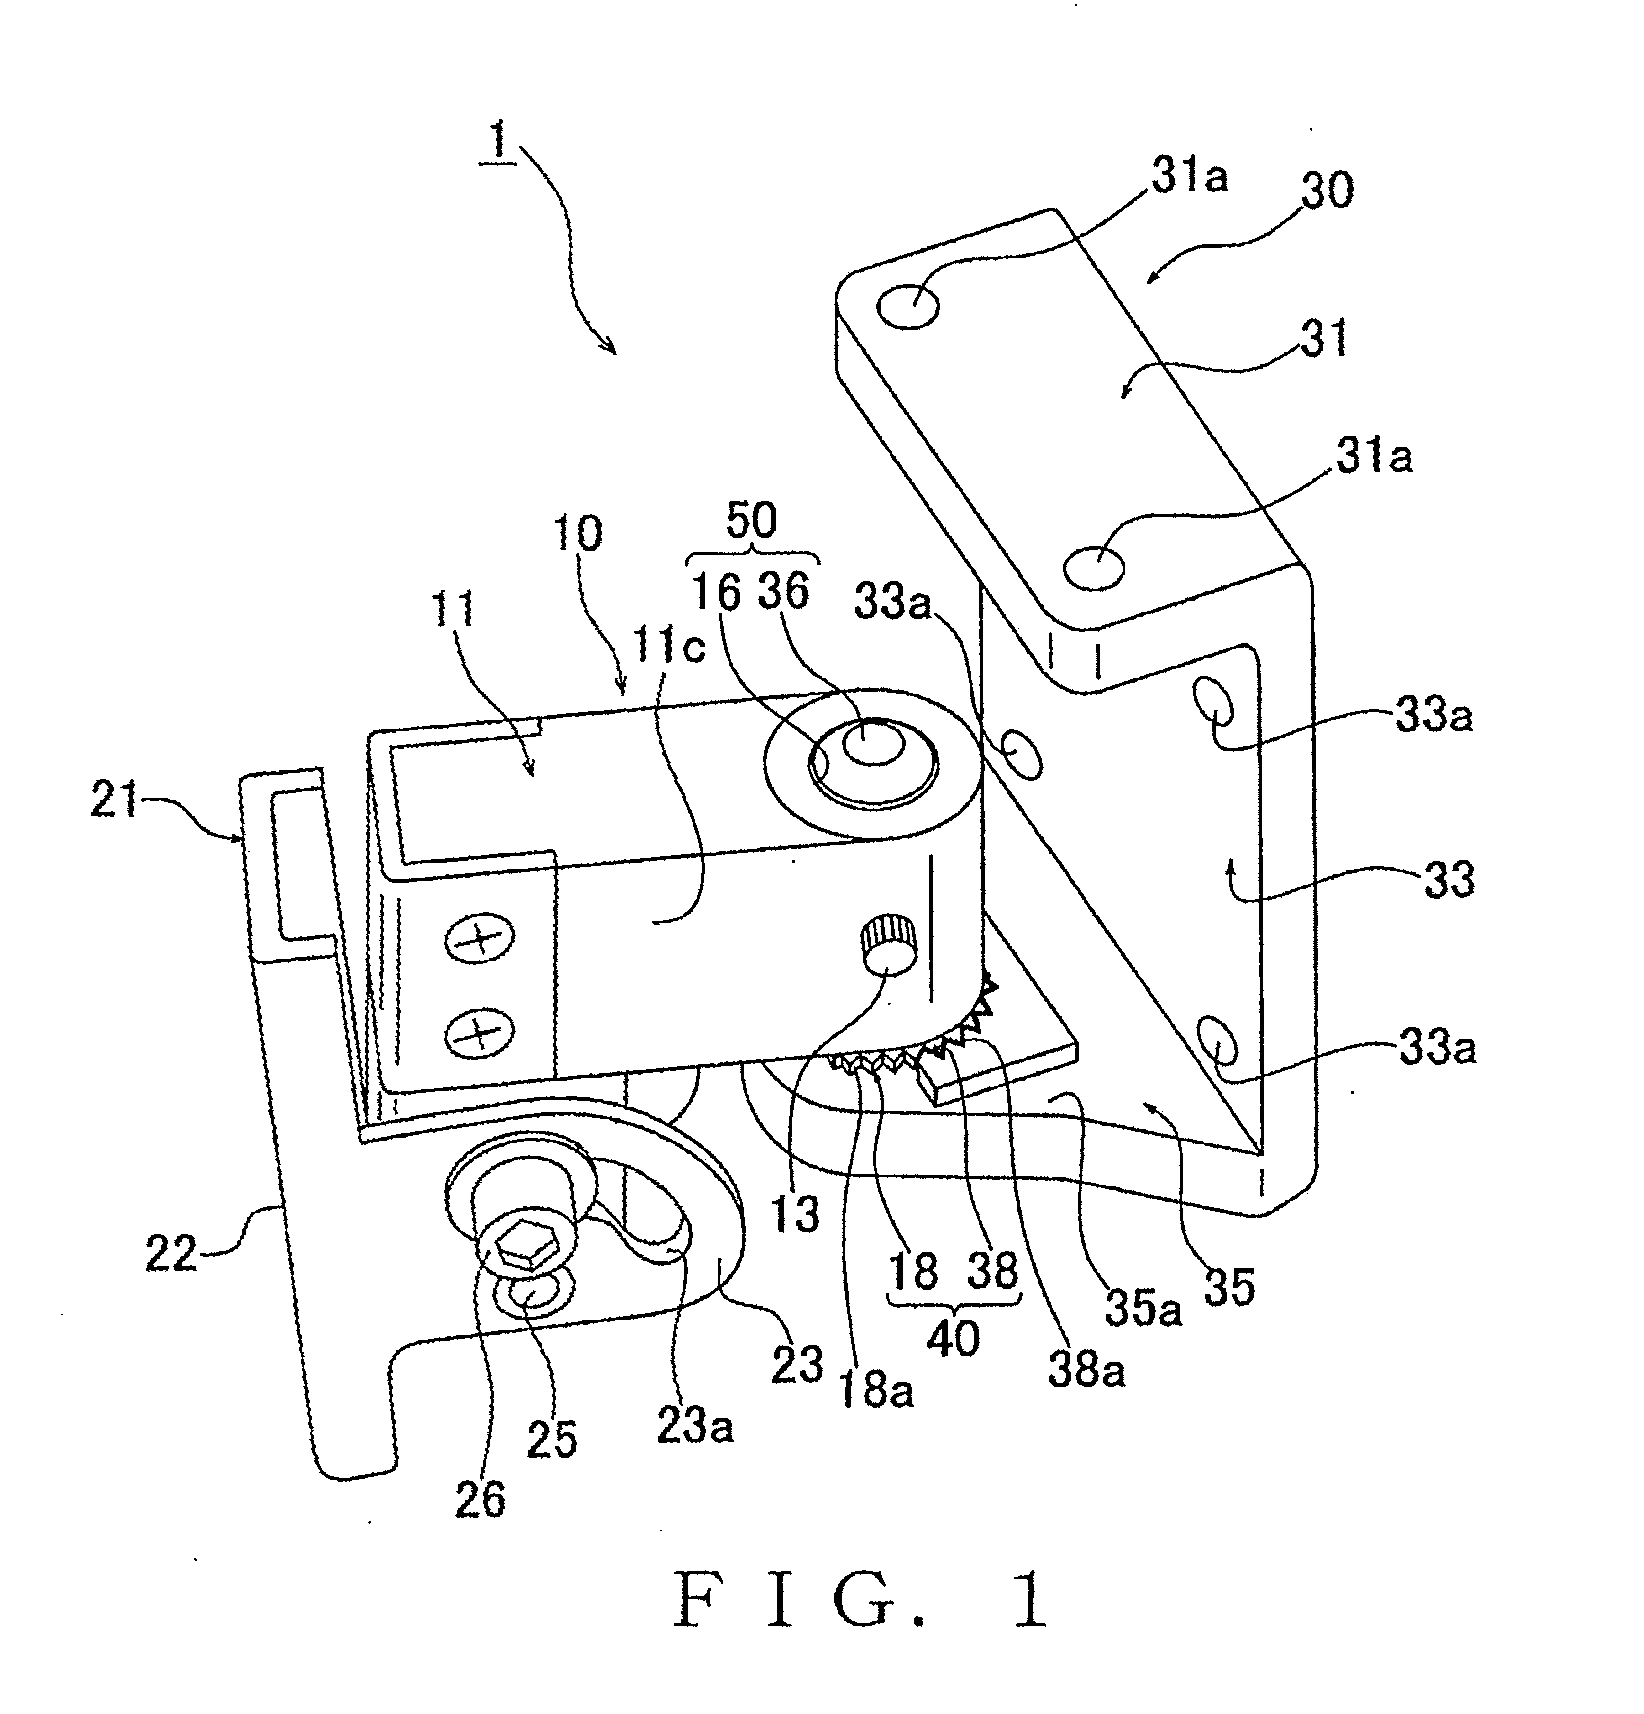 Device mounting apparatus